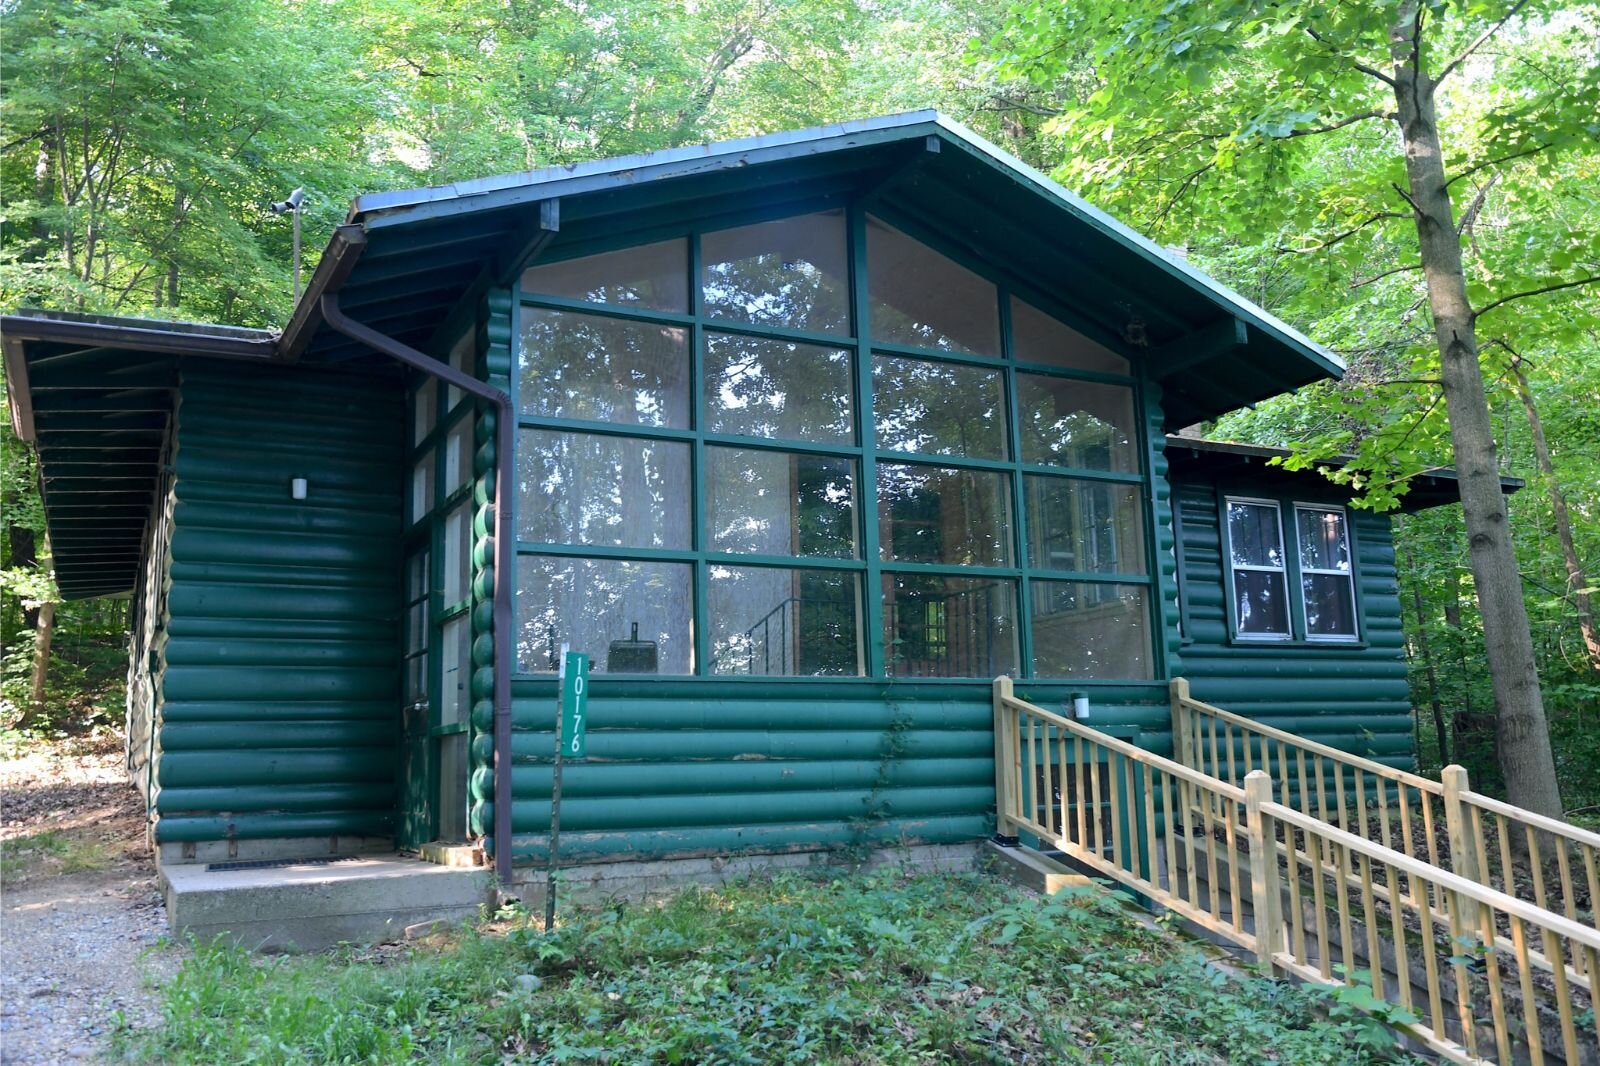 The Winka building on the grounds of Clear Lake Camp is available for short-term rental.